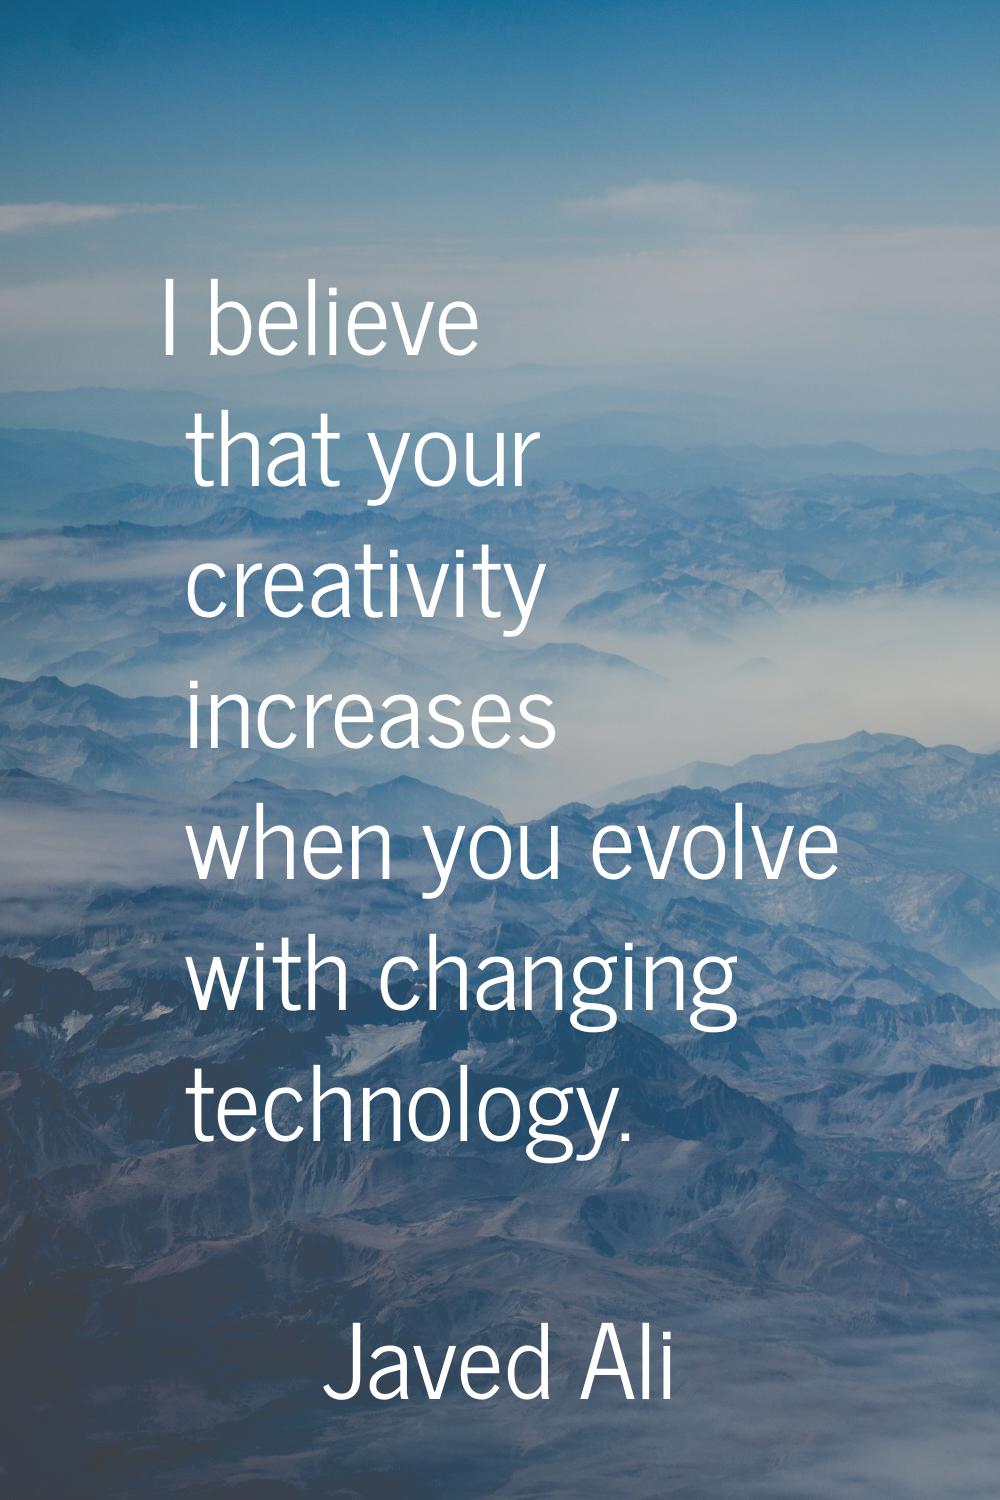 I believe that your creativity increases when you evolve with changing technology.